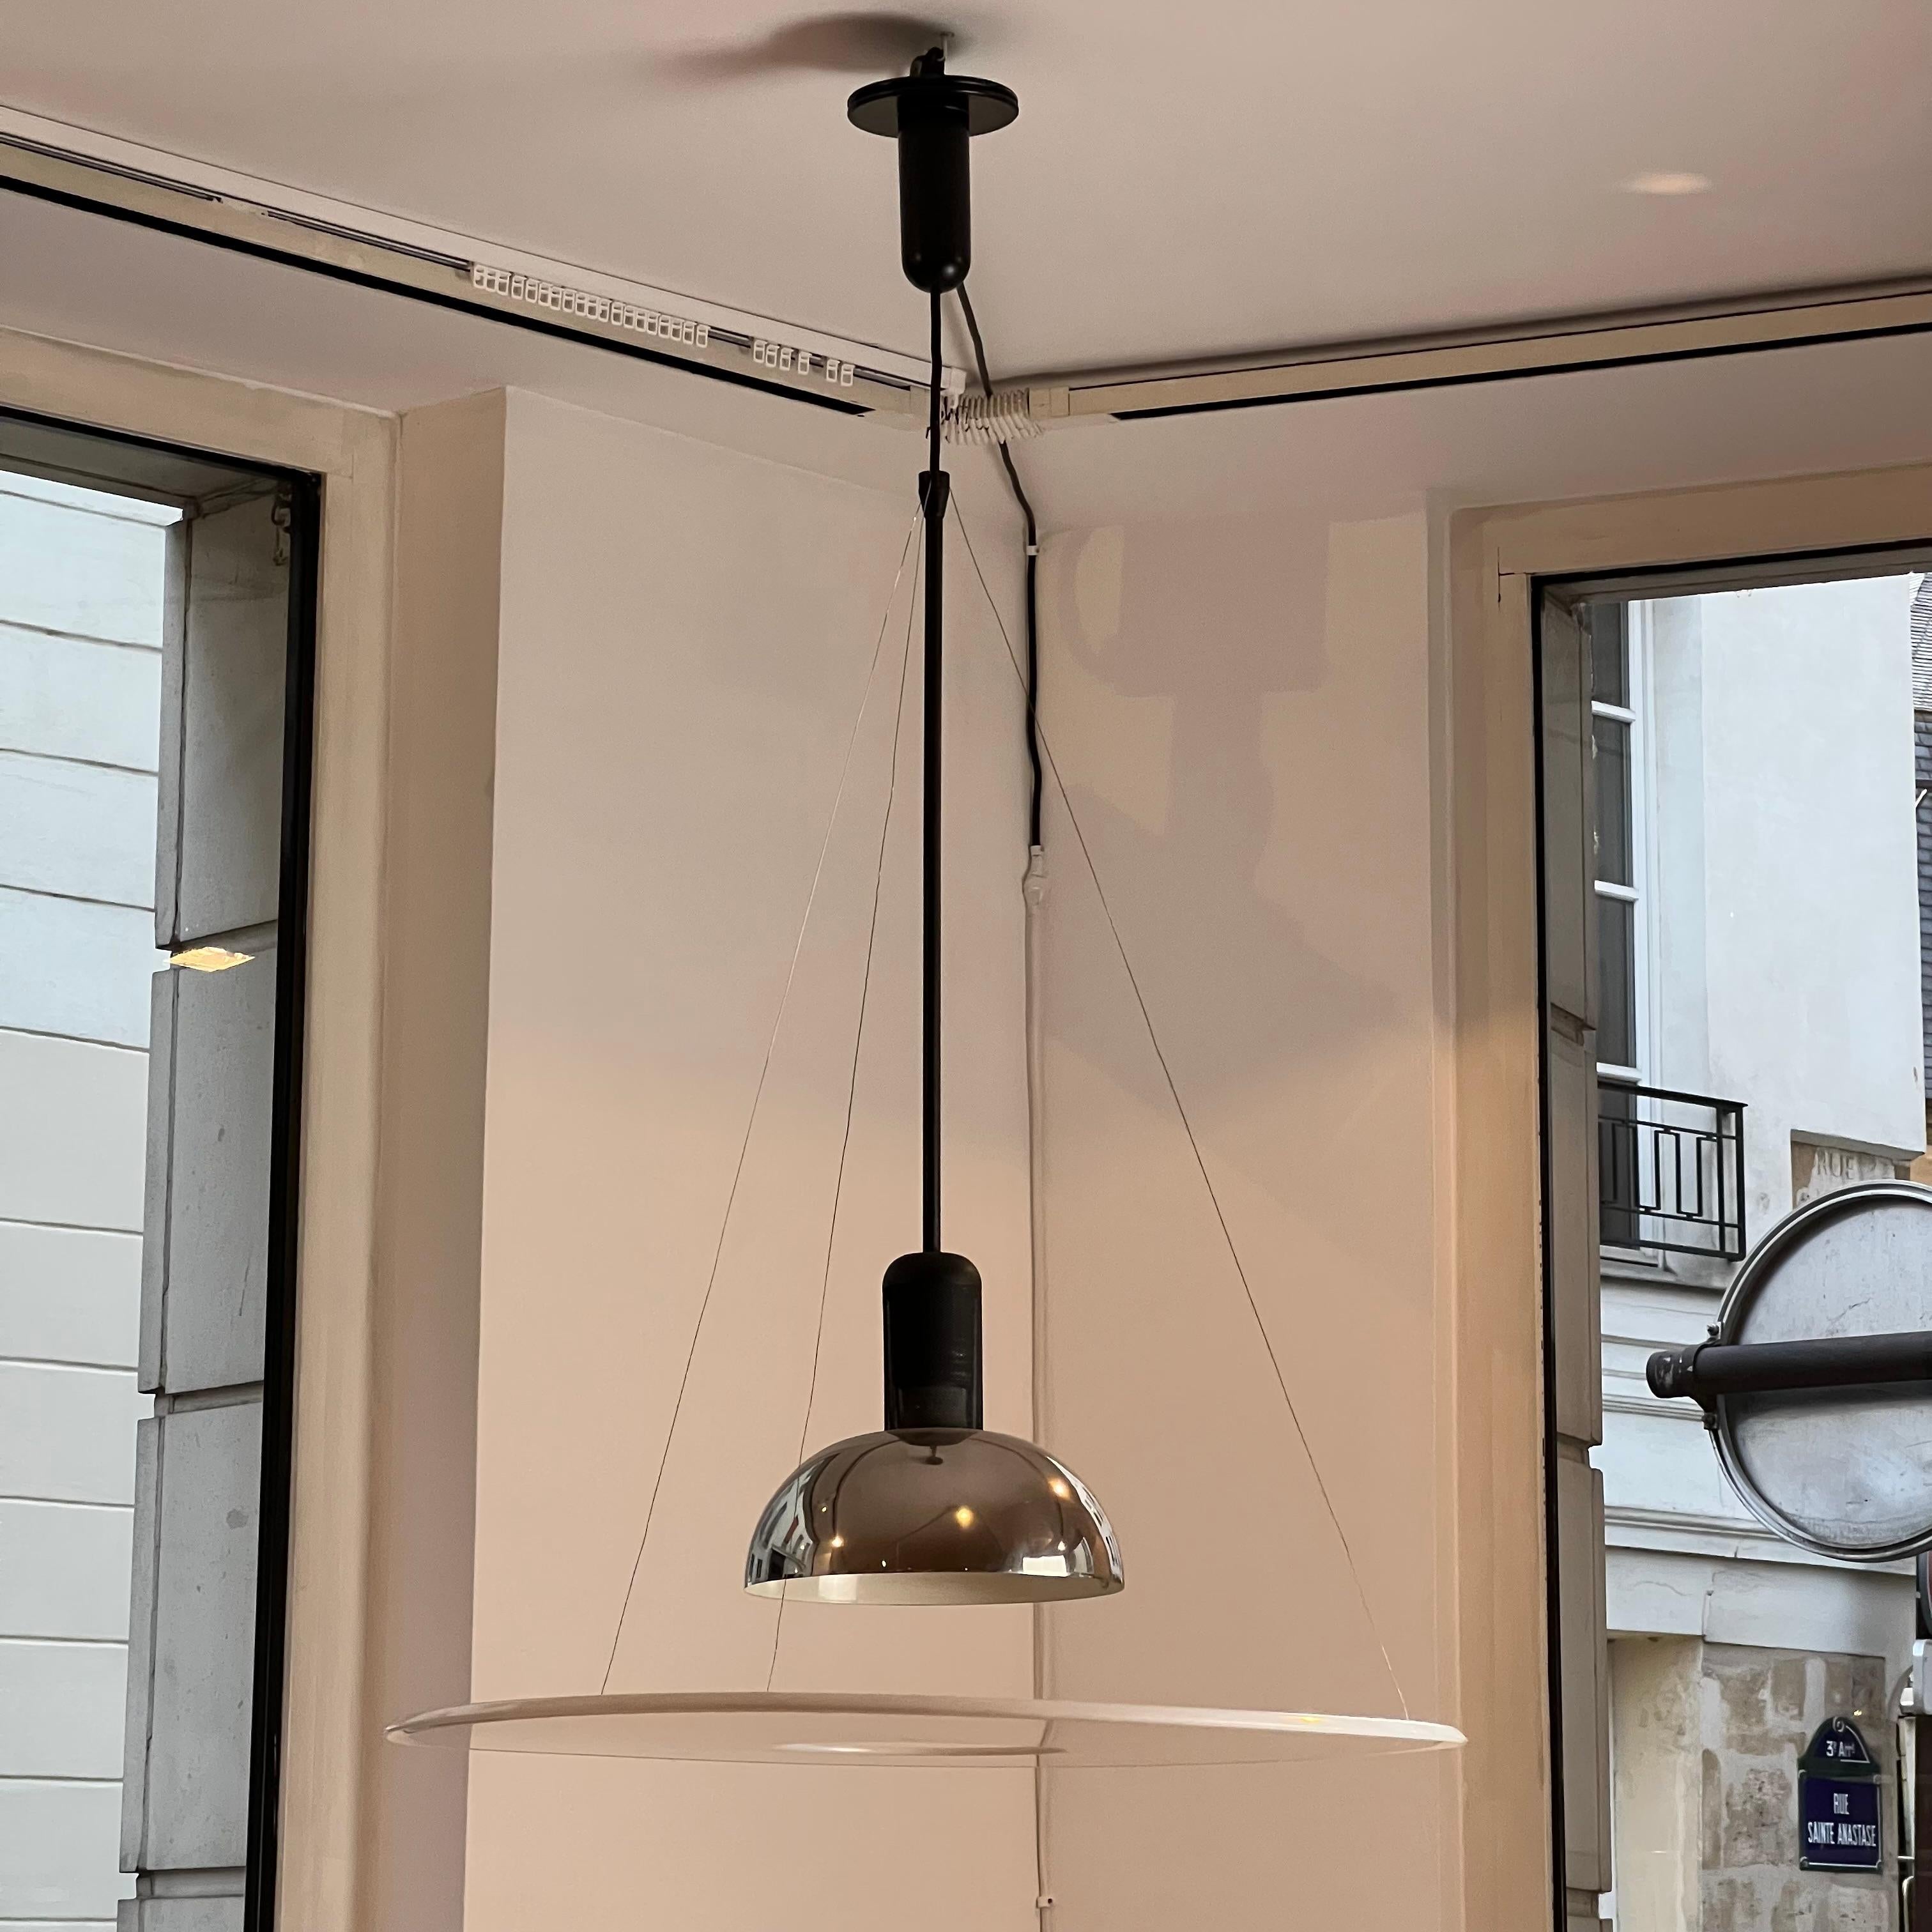 This suspension was created by Achille Castiglioni for the Italian manufacturer Flos. He was one of the most important designer of 20th century . He will be recognized for his avant-garde creations and sometimes inspired by the ready-made. The